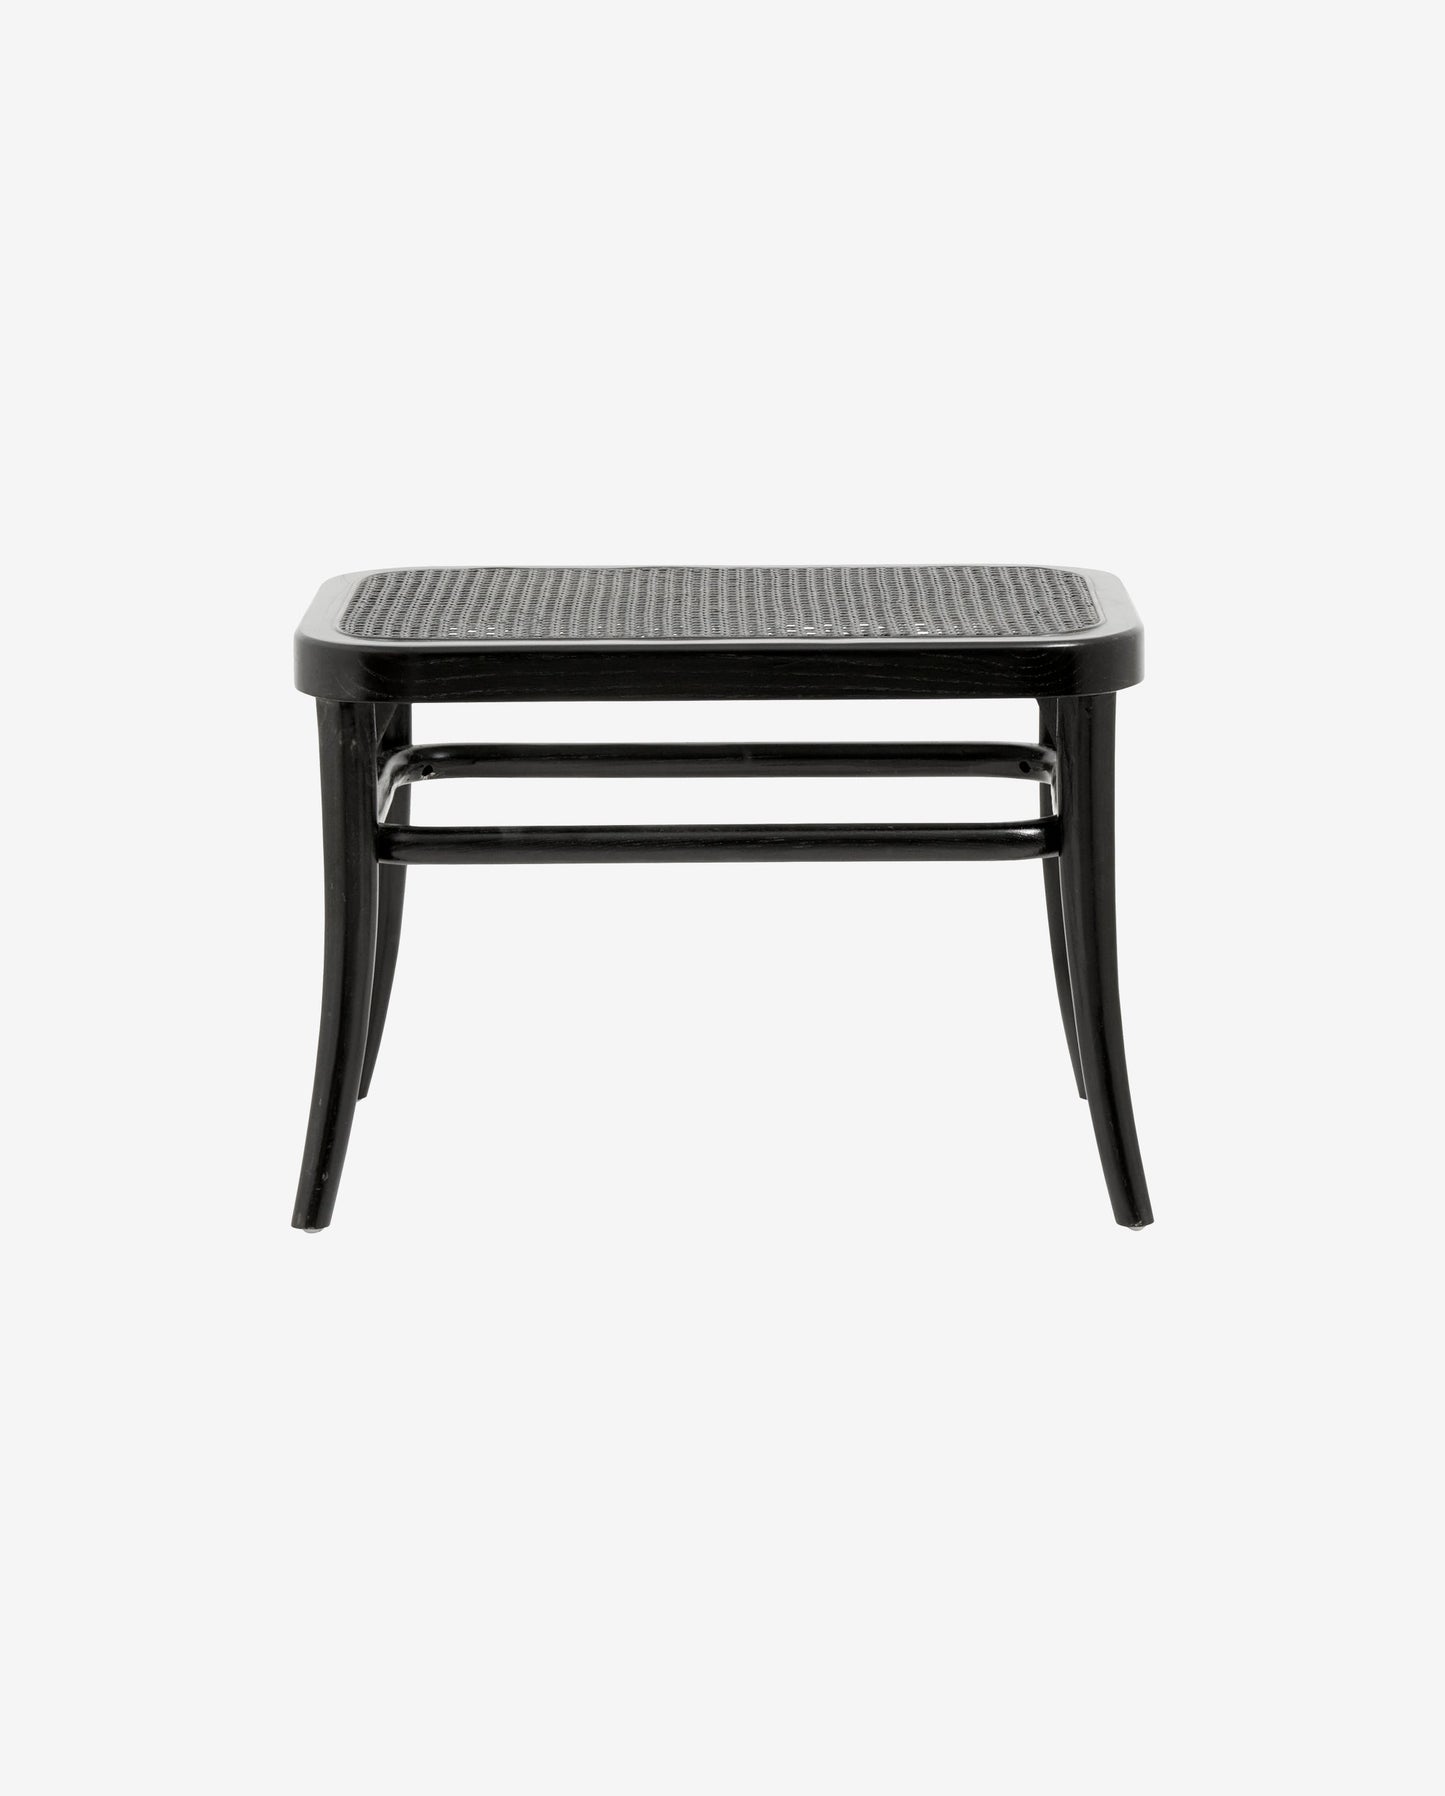 Nordal WICKY small bench, black